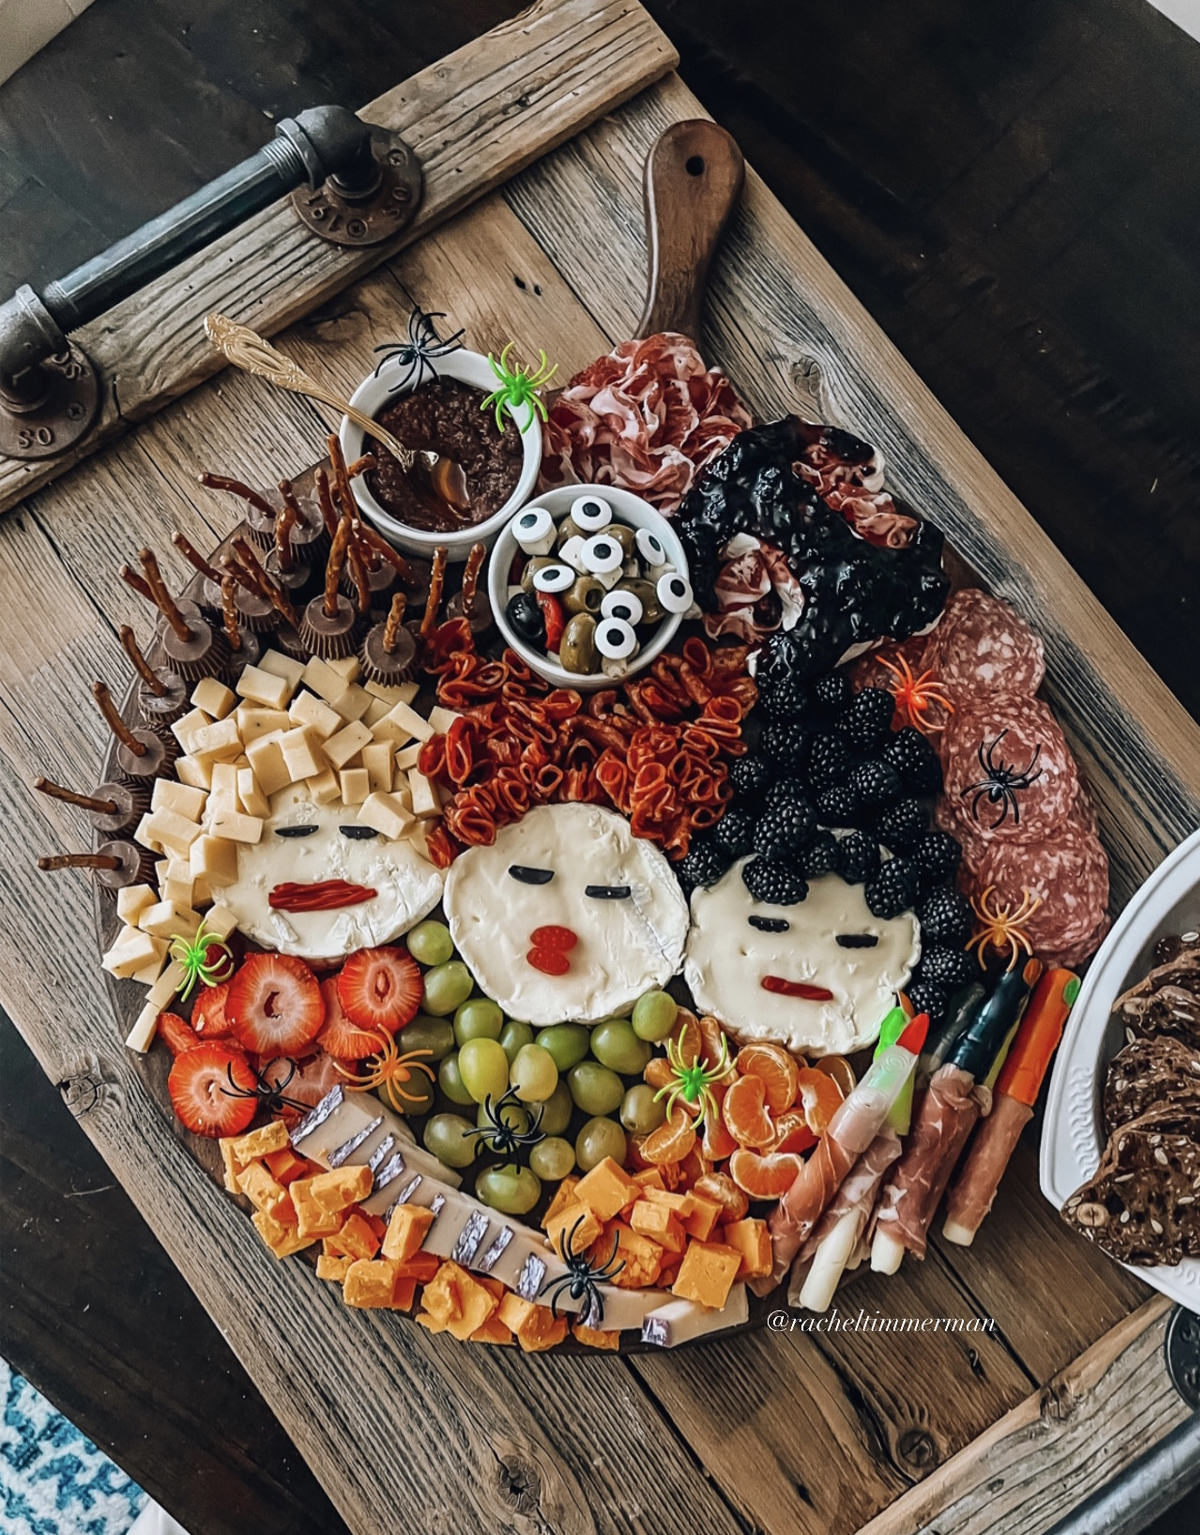 Something Delightful's board showcases meats, berries, cheese, grapes, strawberries, and candy.